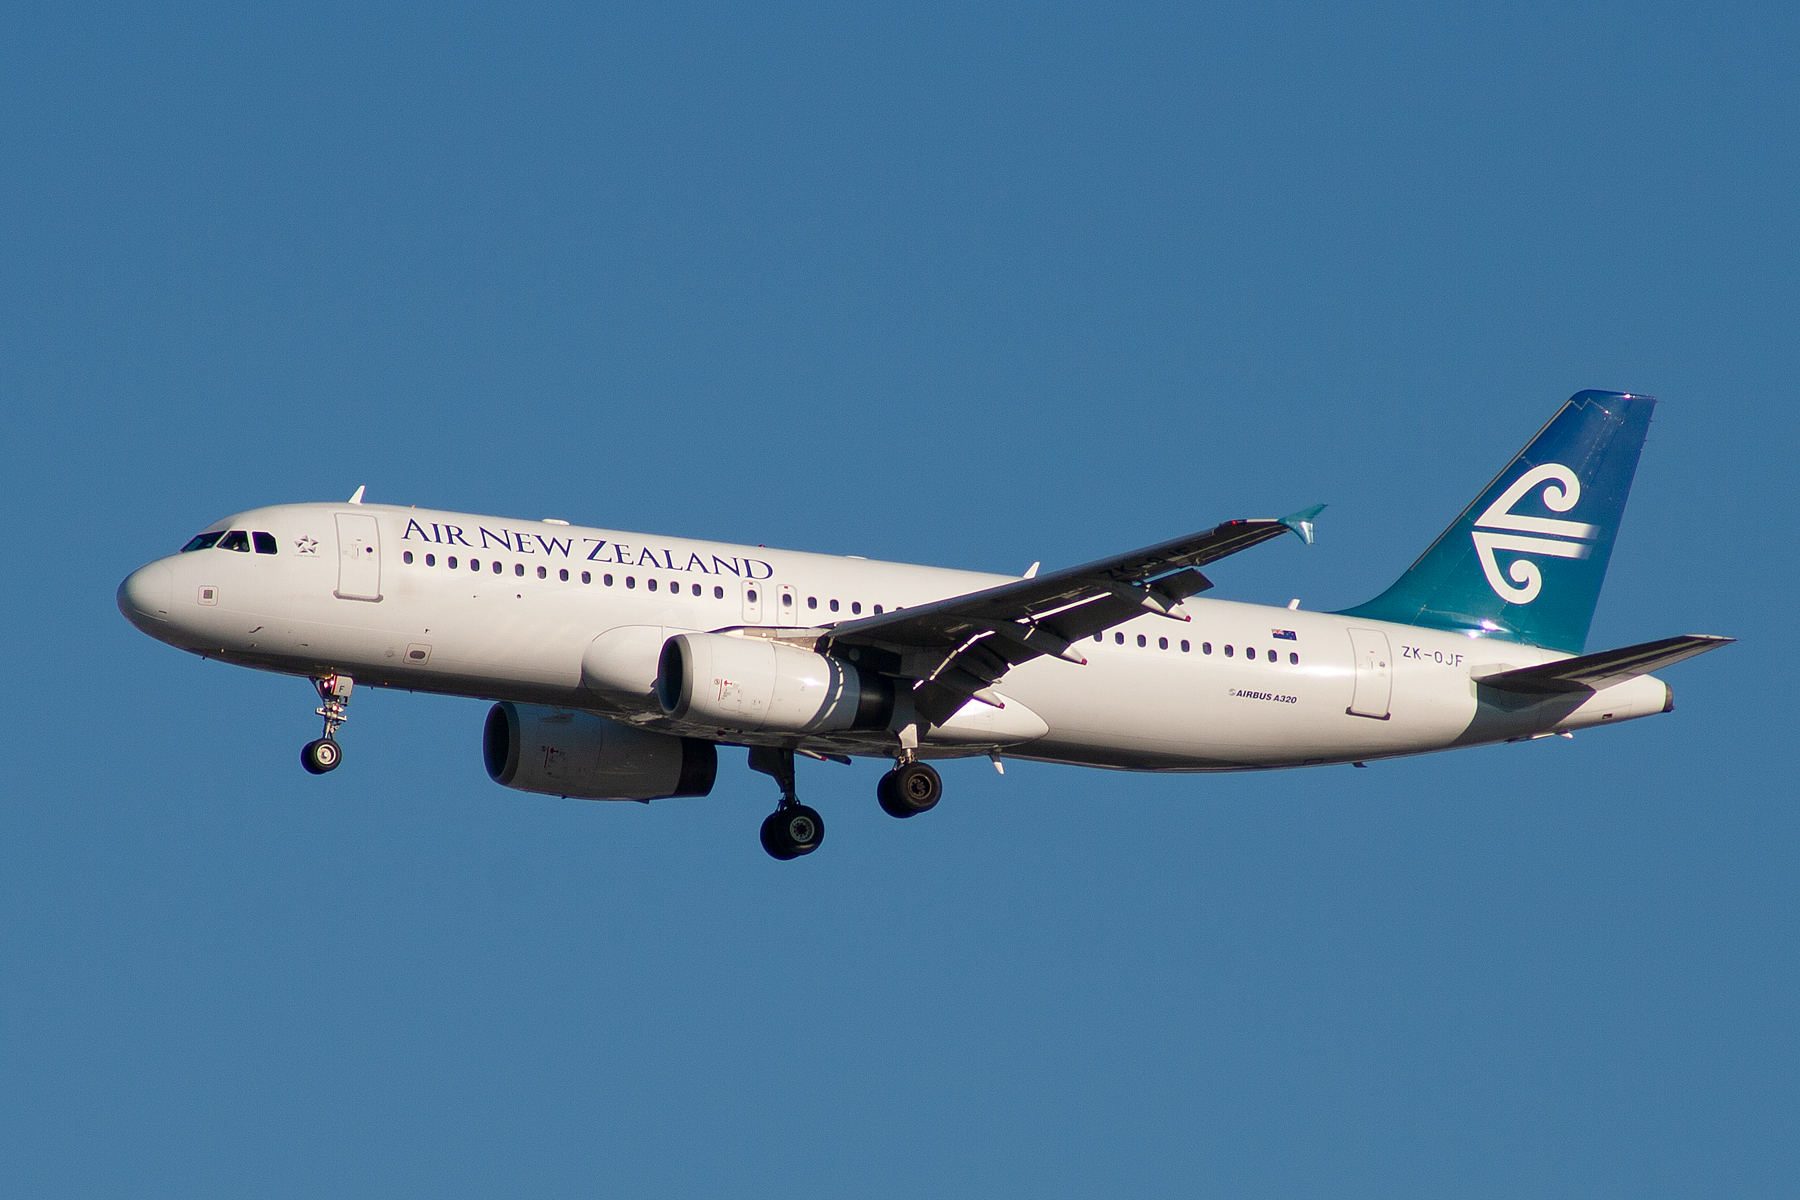 Air New Zealand Airbus A320-200 ZK-OJF at Kingsford Smith